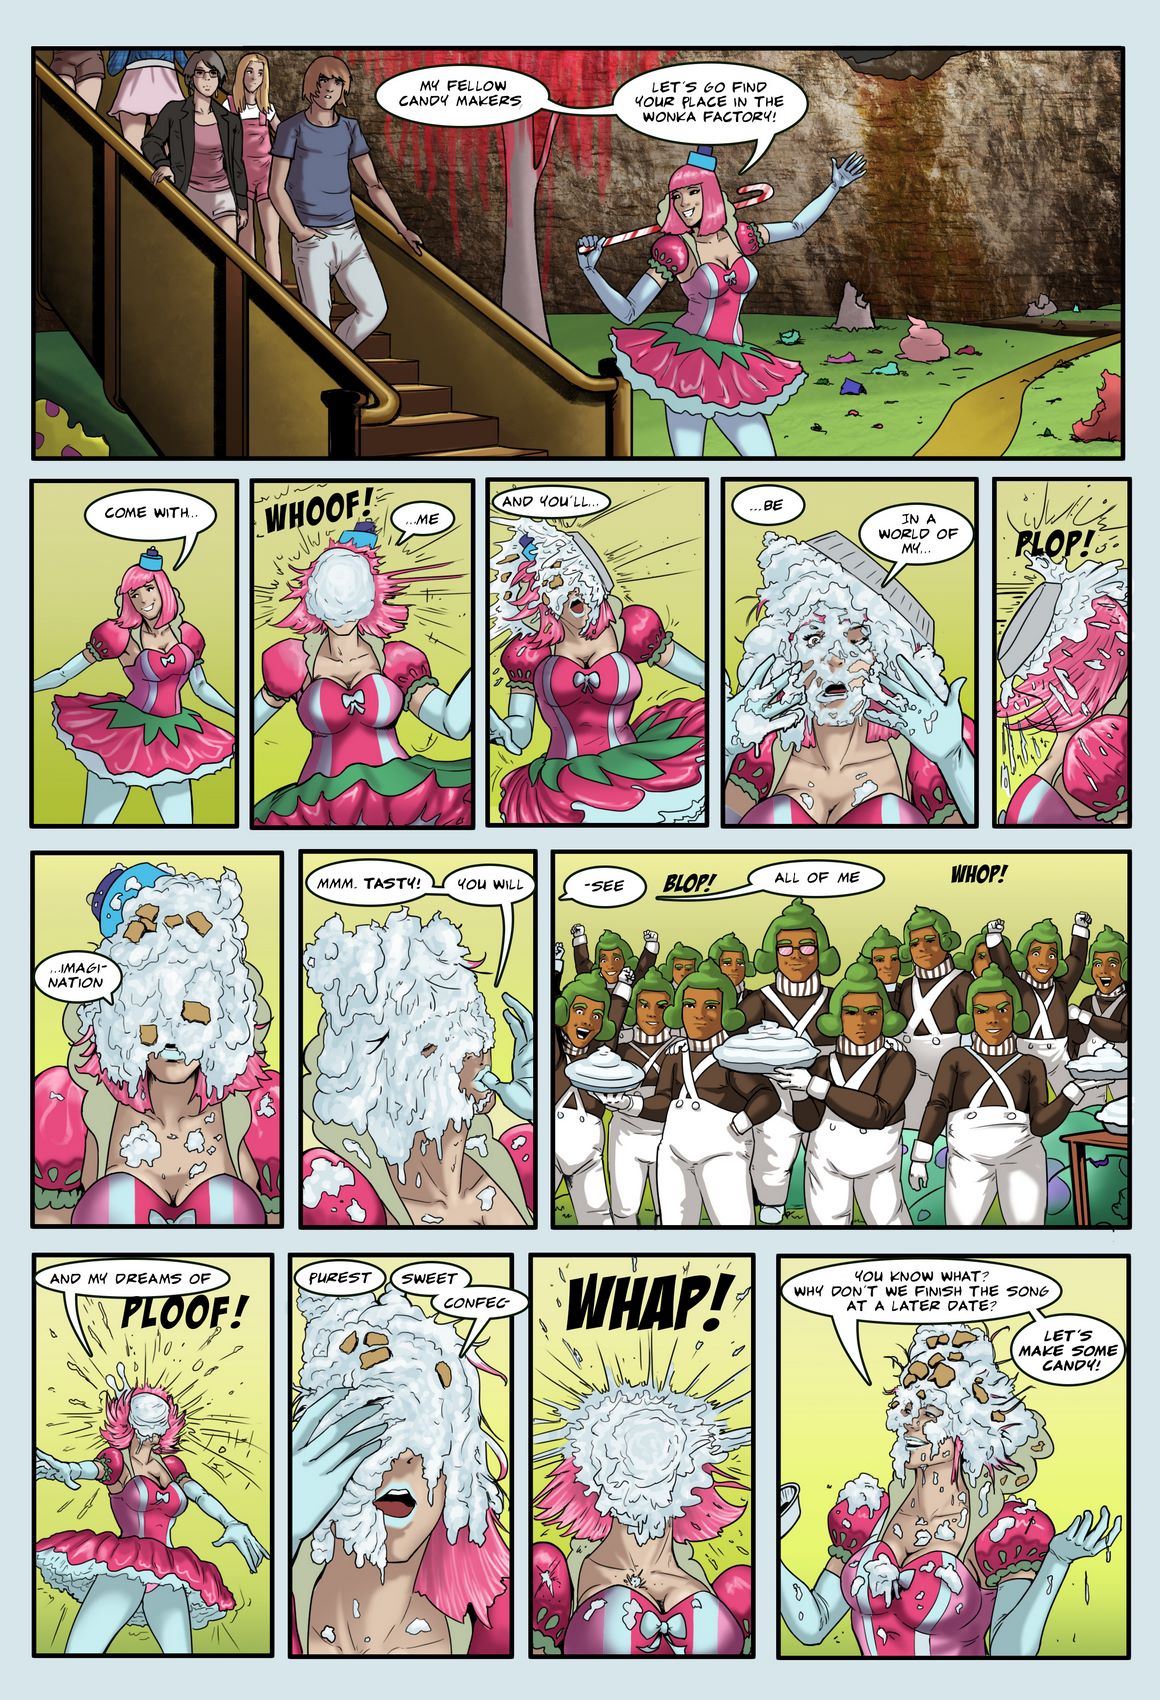 Wendy Wonka and the Chocolate Fetish Factory - Chapter 2 Issue 1.